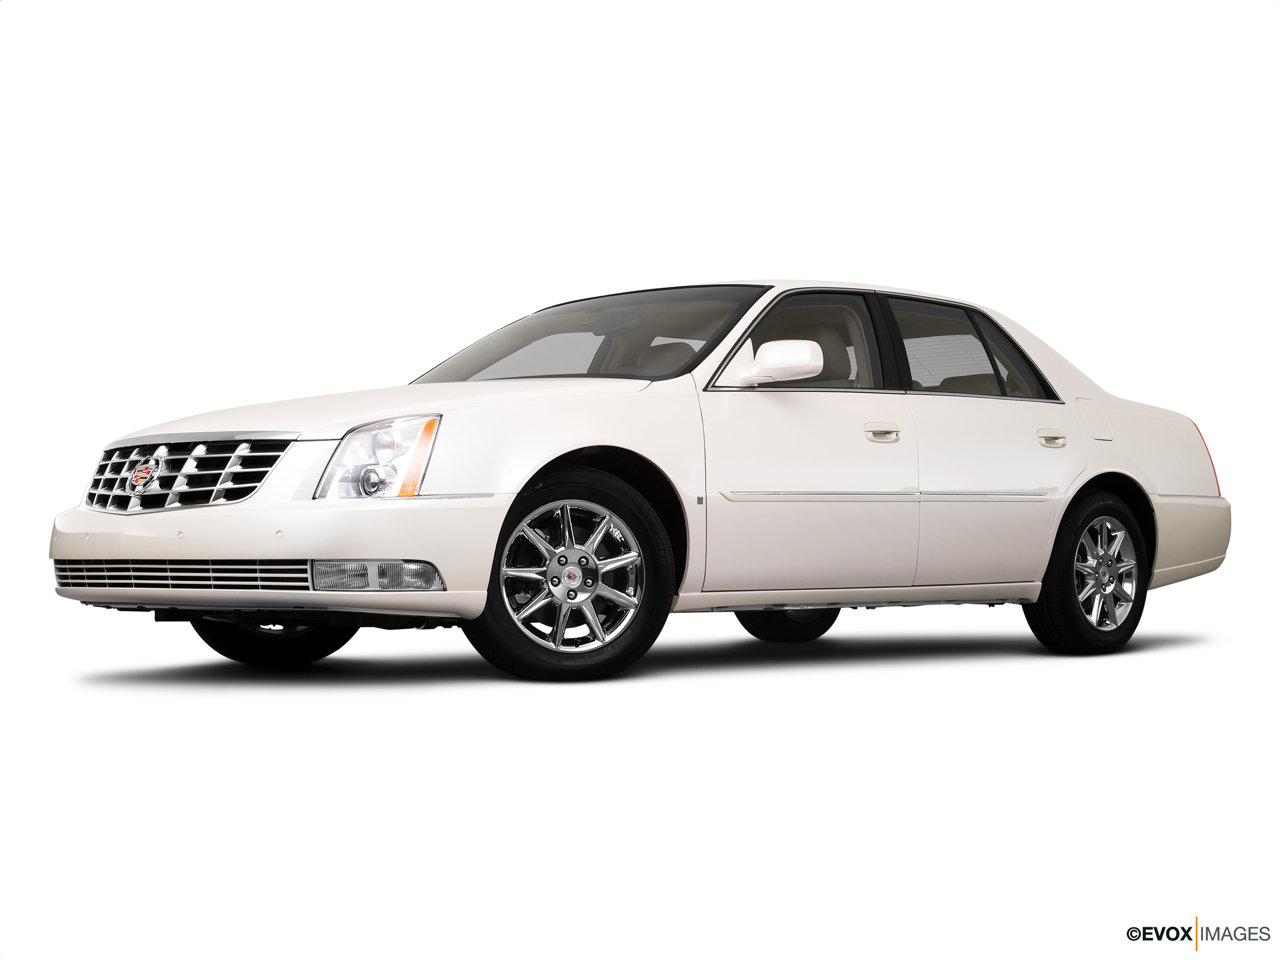 2010 Cadillac DTS Luxury Collection Low/wide front 5/8. 